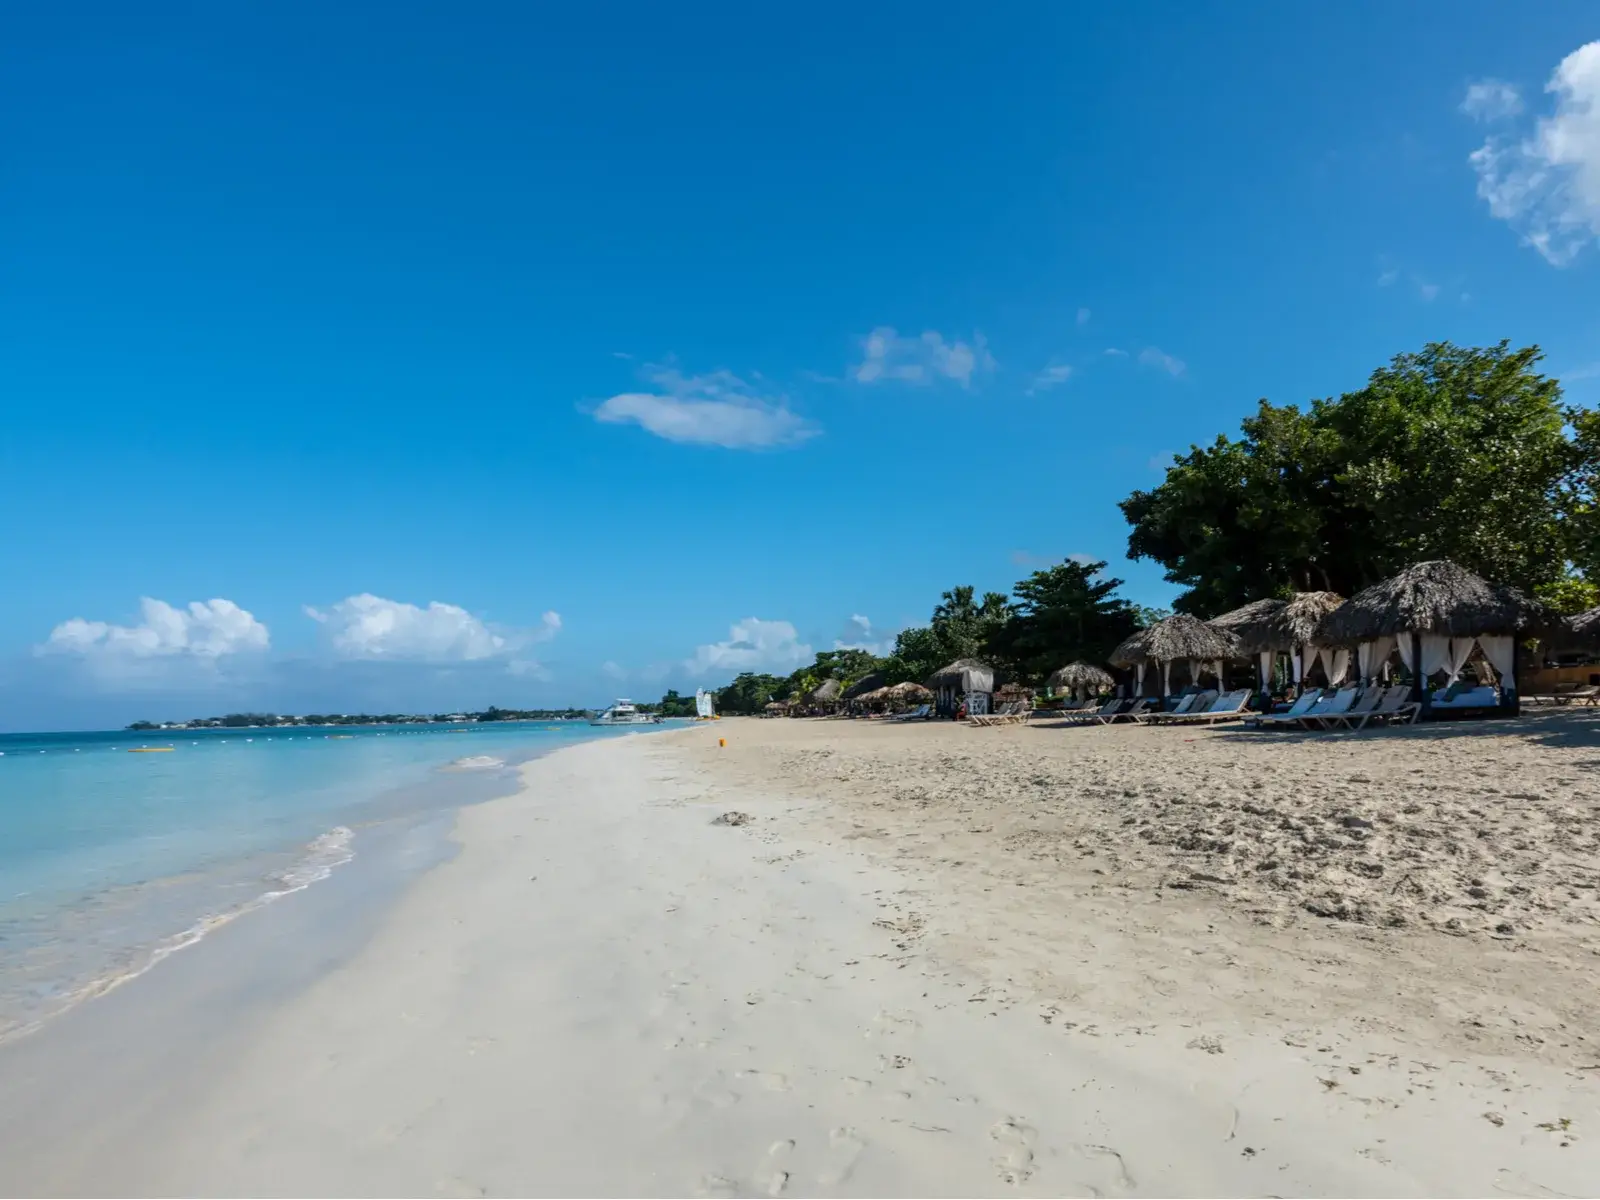 Pretty view of one of Jamaica's best beaches, Seven Mile Beach in Negril